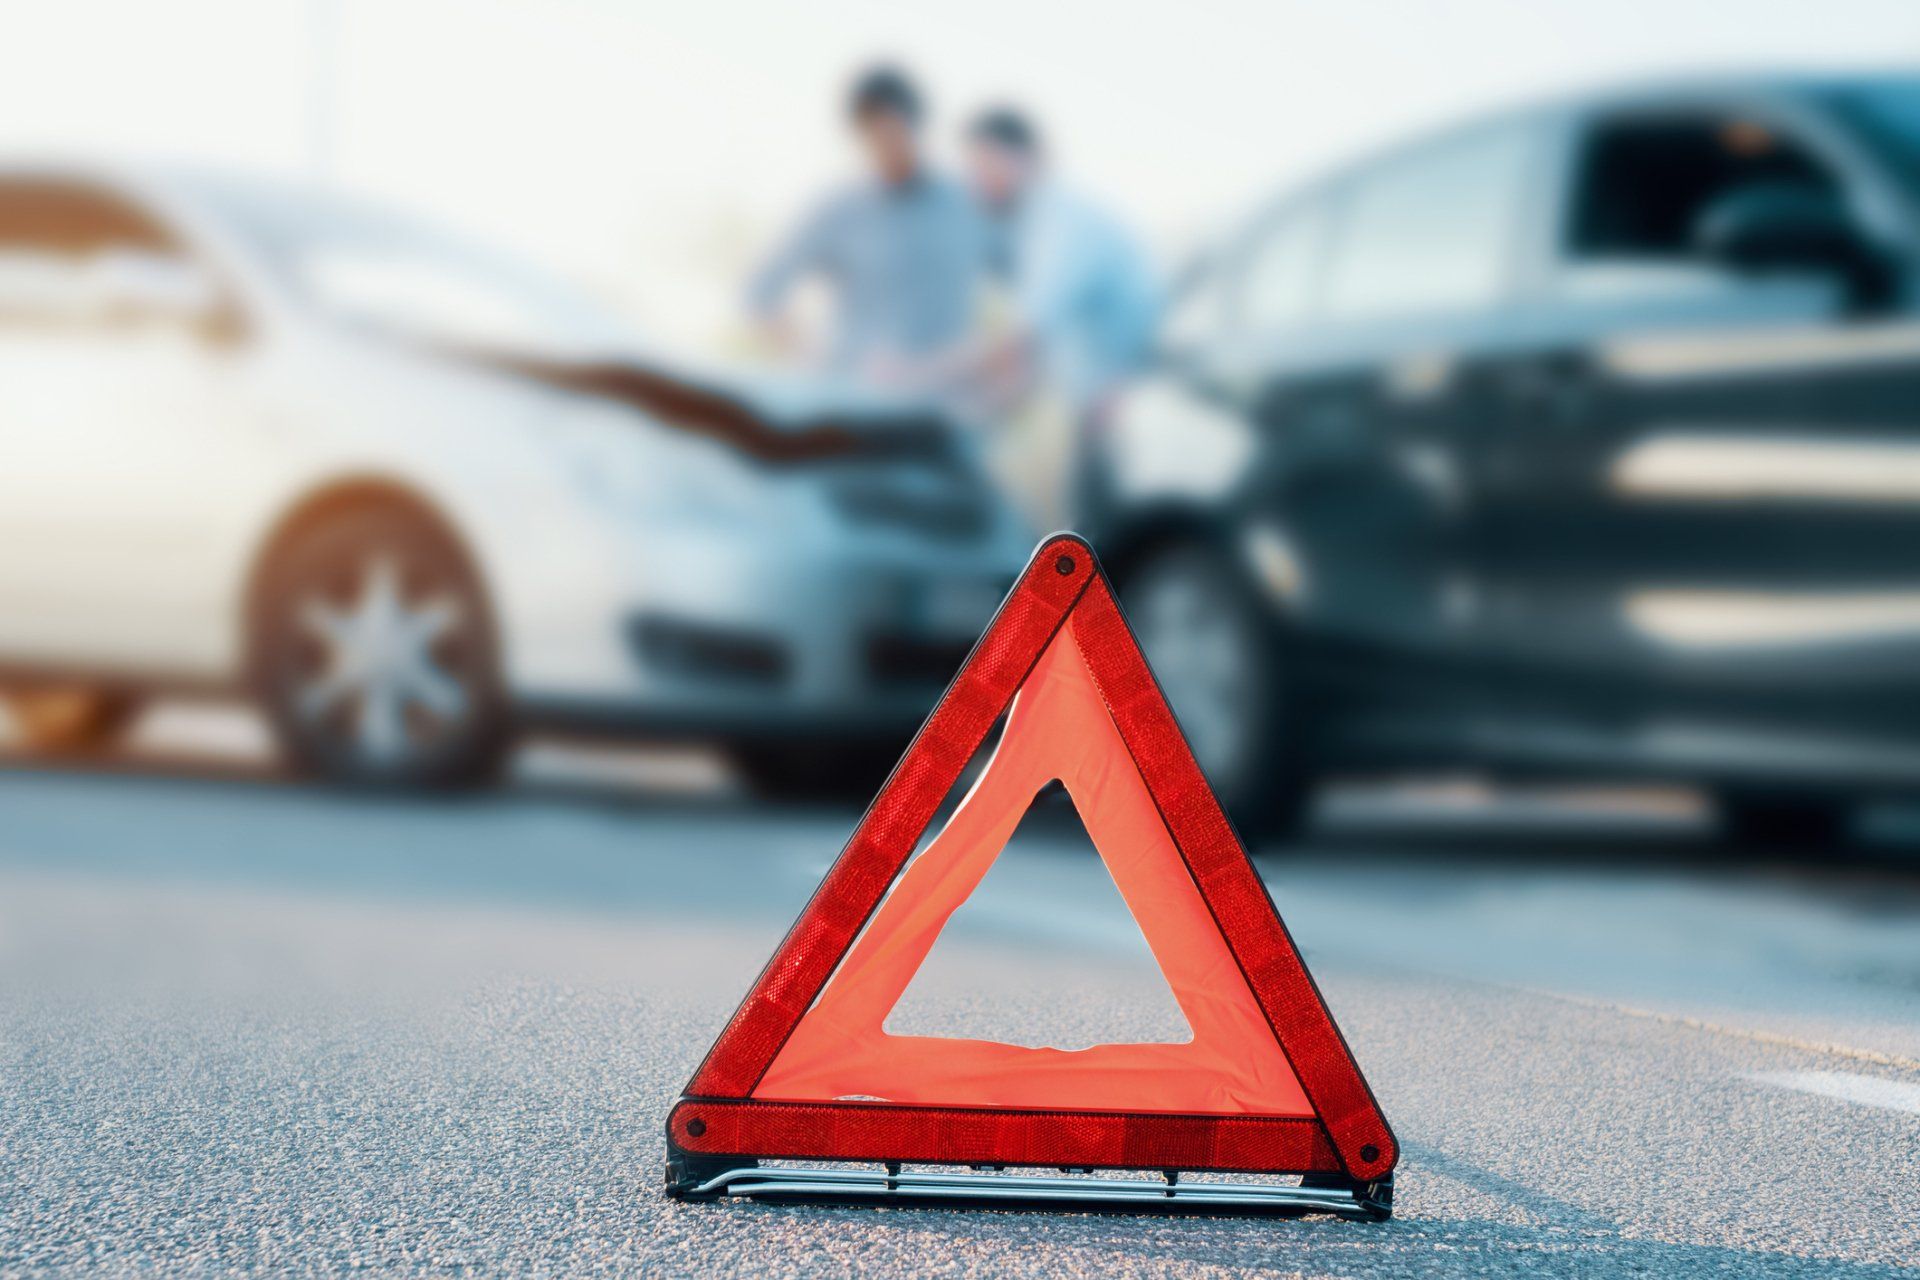 A car accident that an accident lawyer near El Dorado Hills, CA could help you with